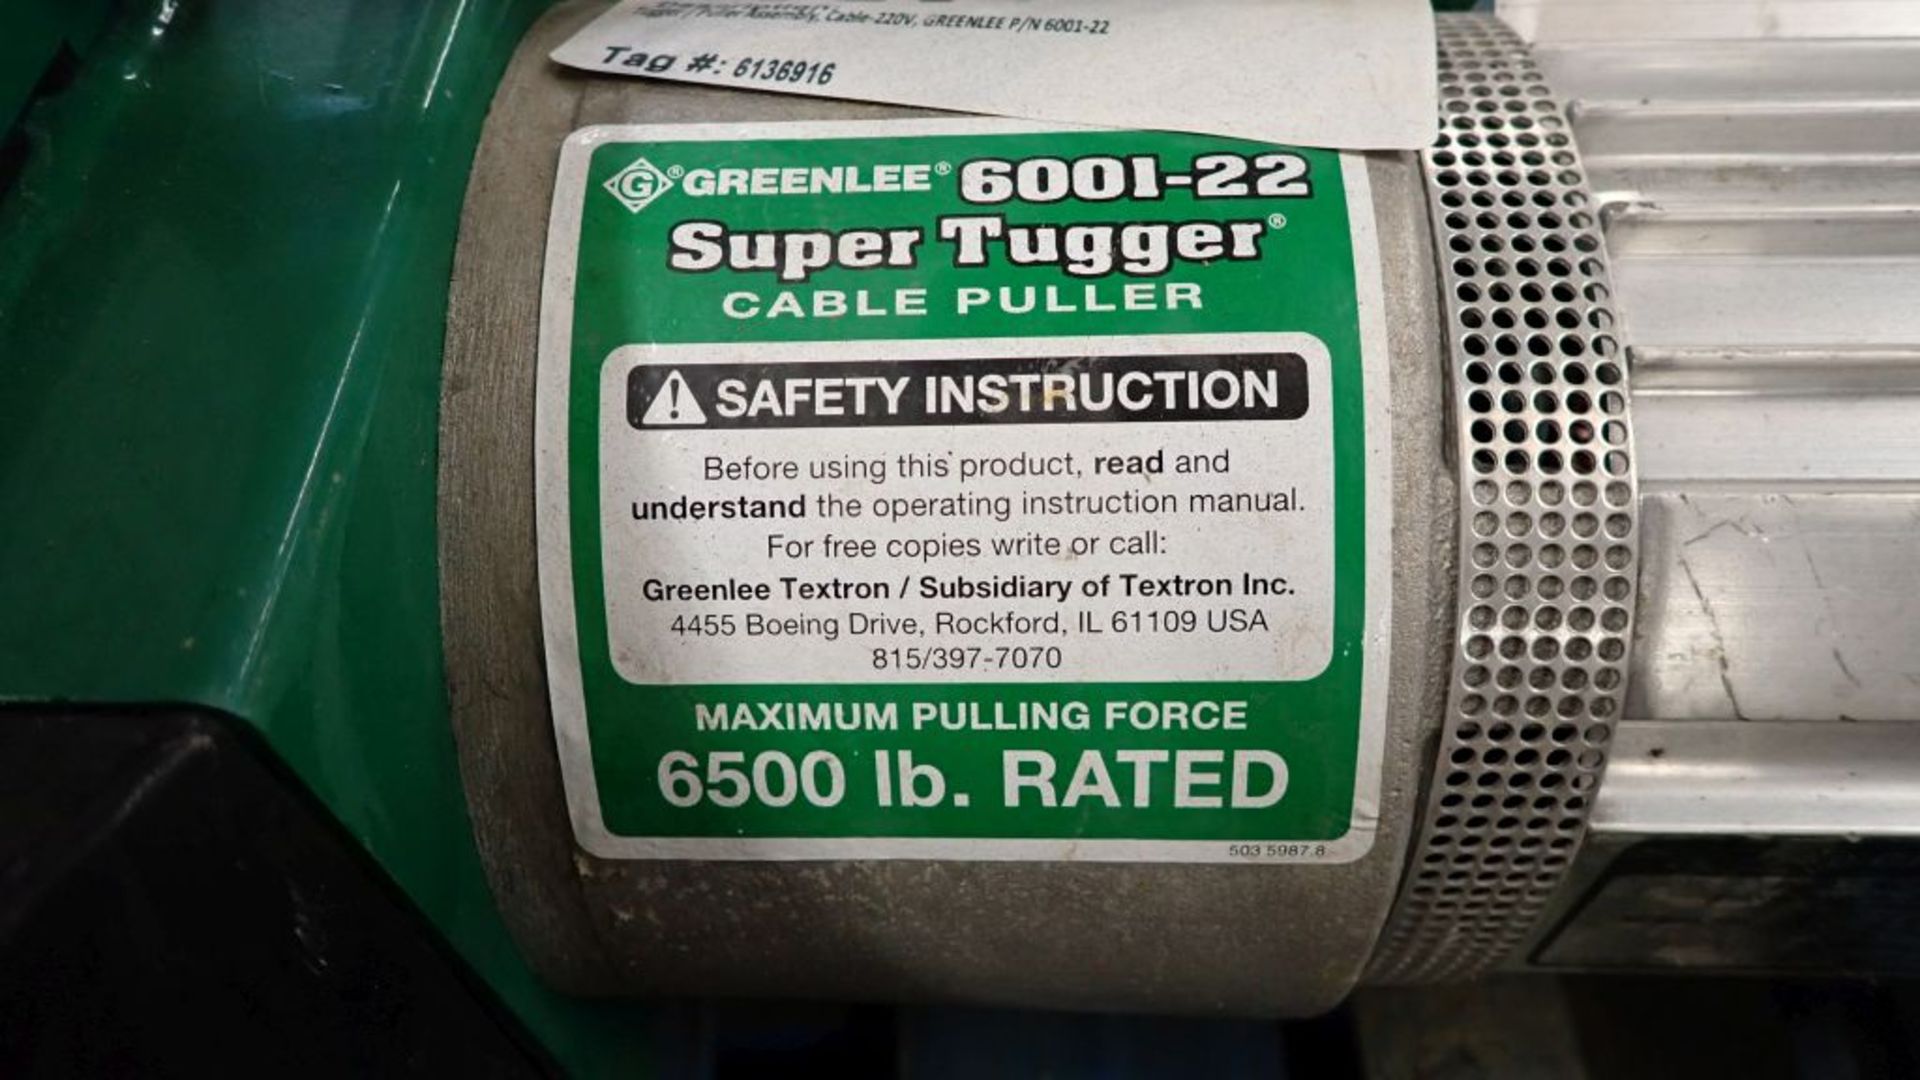 Greenlee Super Tugger Heavy Duty Cable Puller - Image 5 of 9